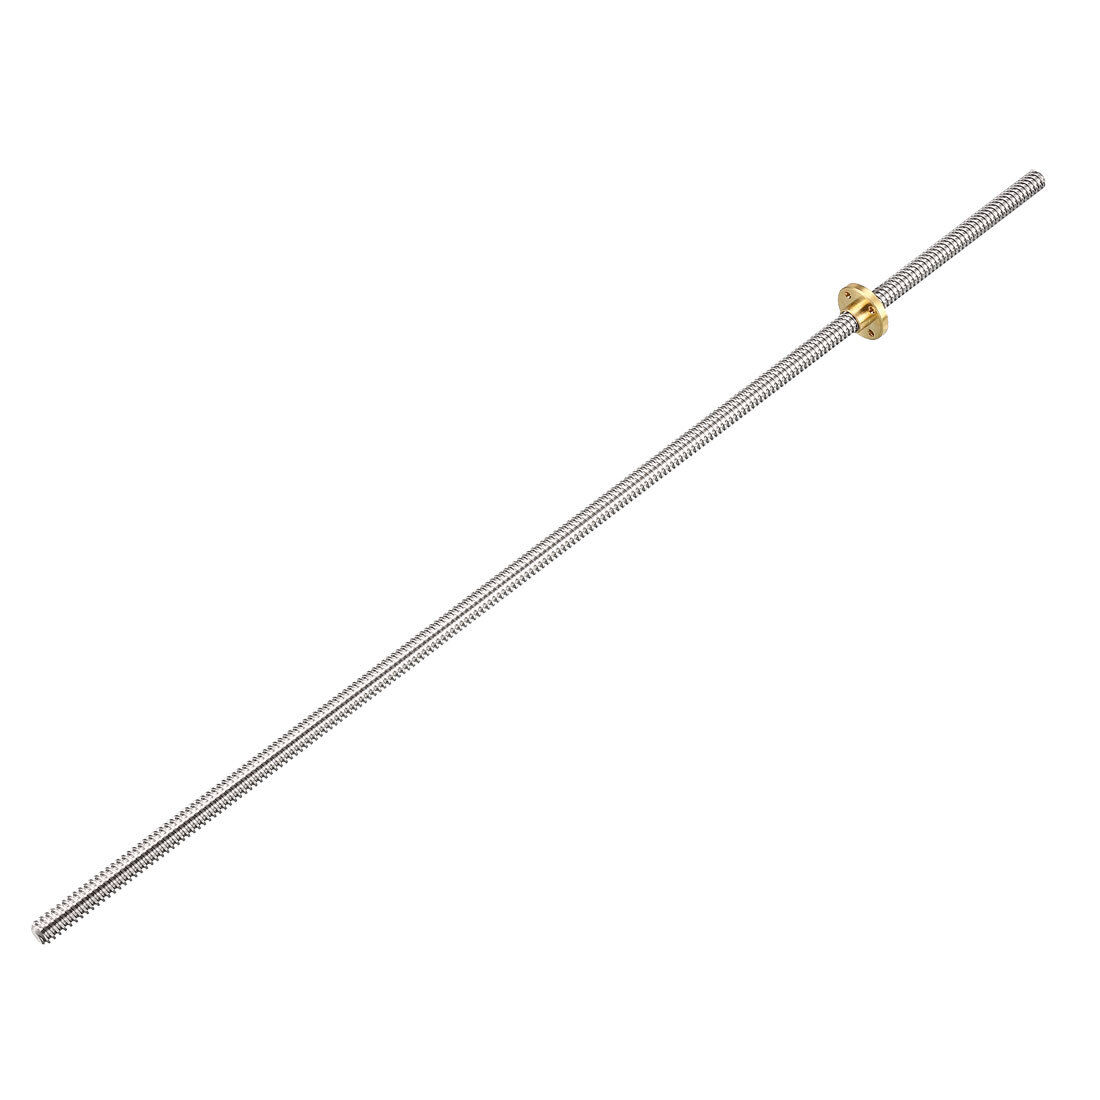 500mm T8 Pitch 2mm Lead 4mm Lead Screw Rod with Copper Nut for 3D Printer